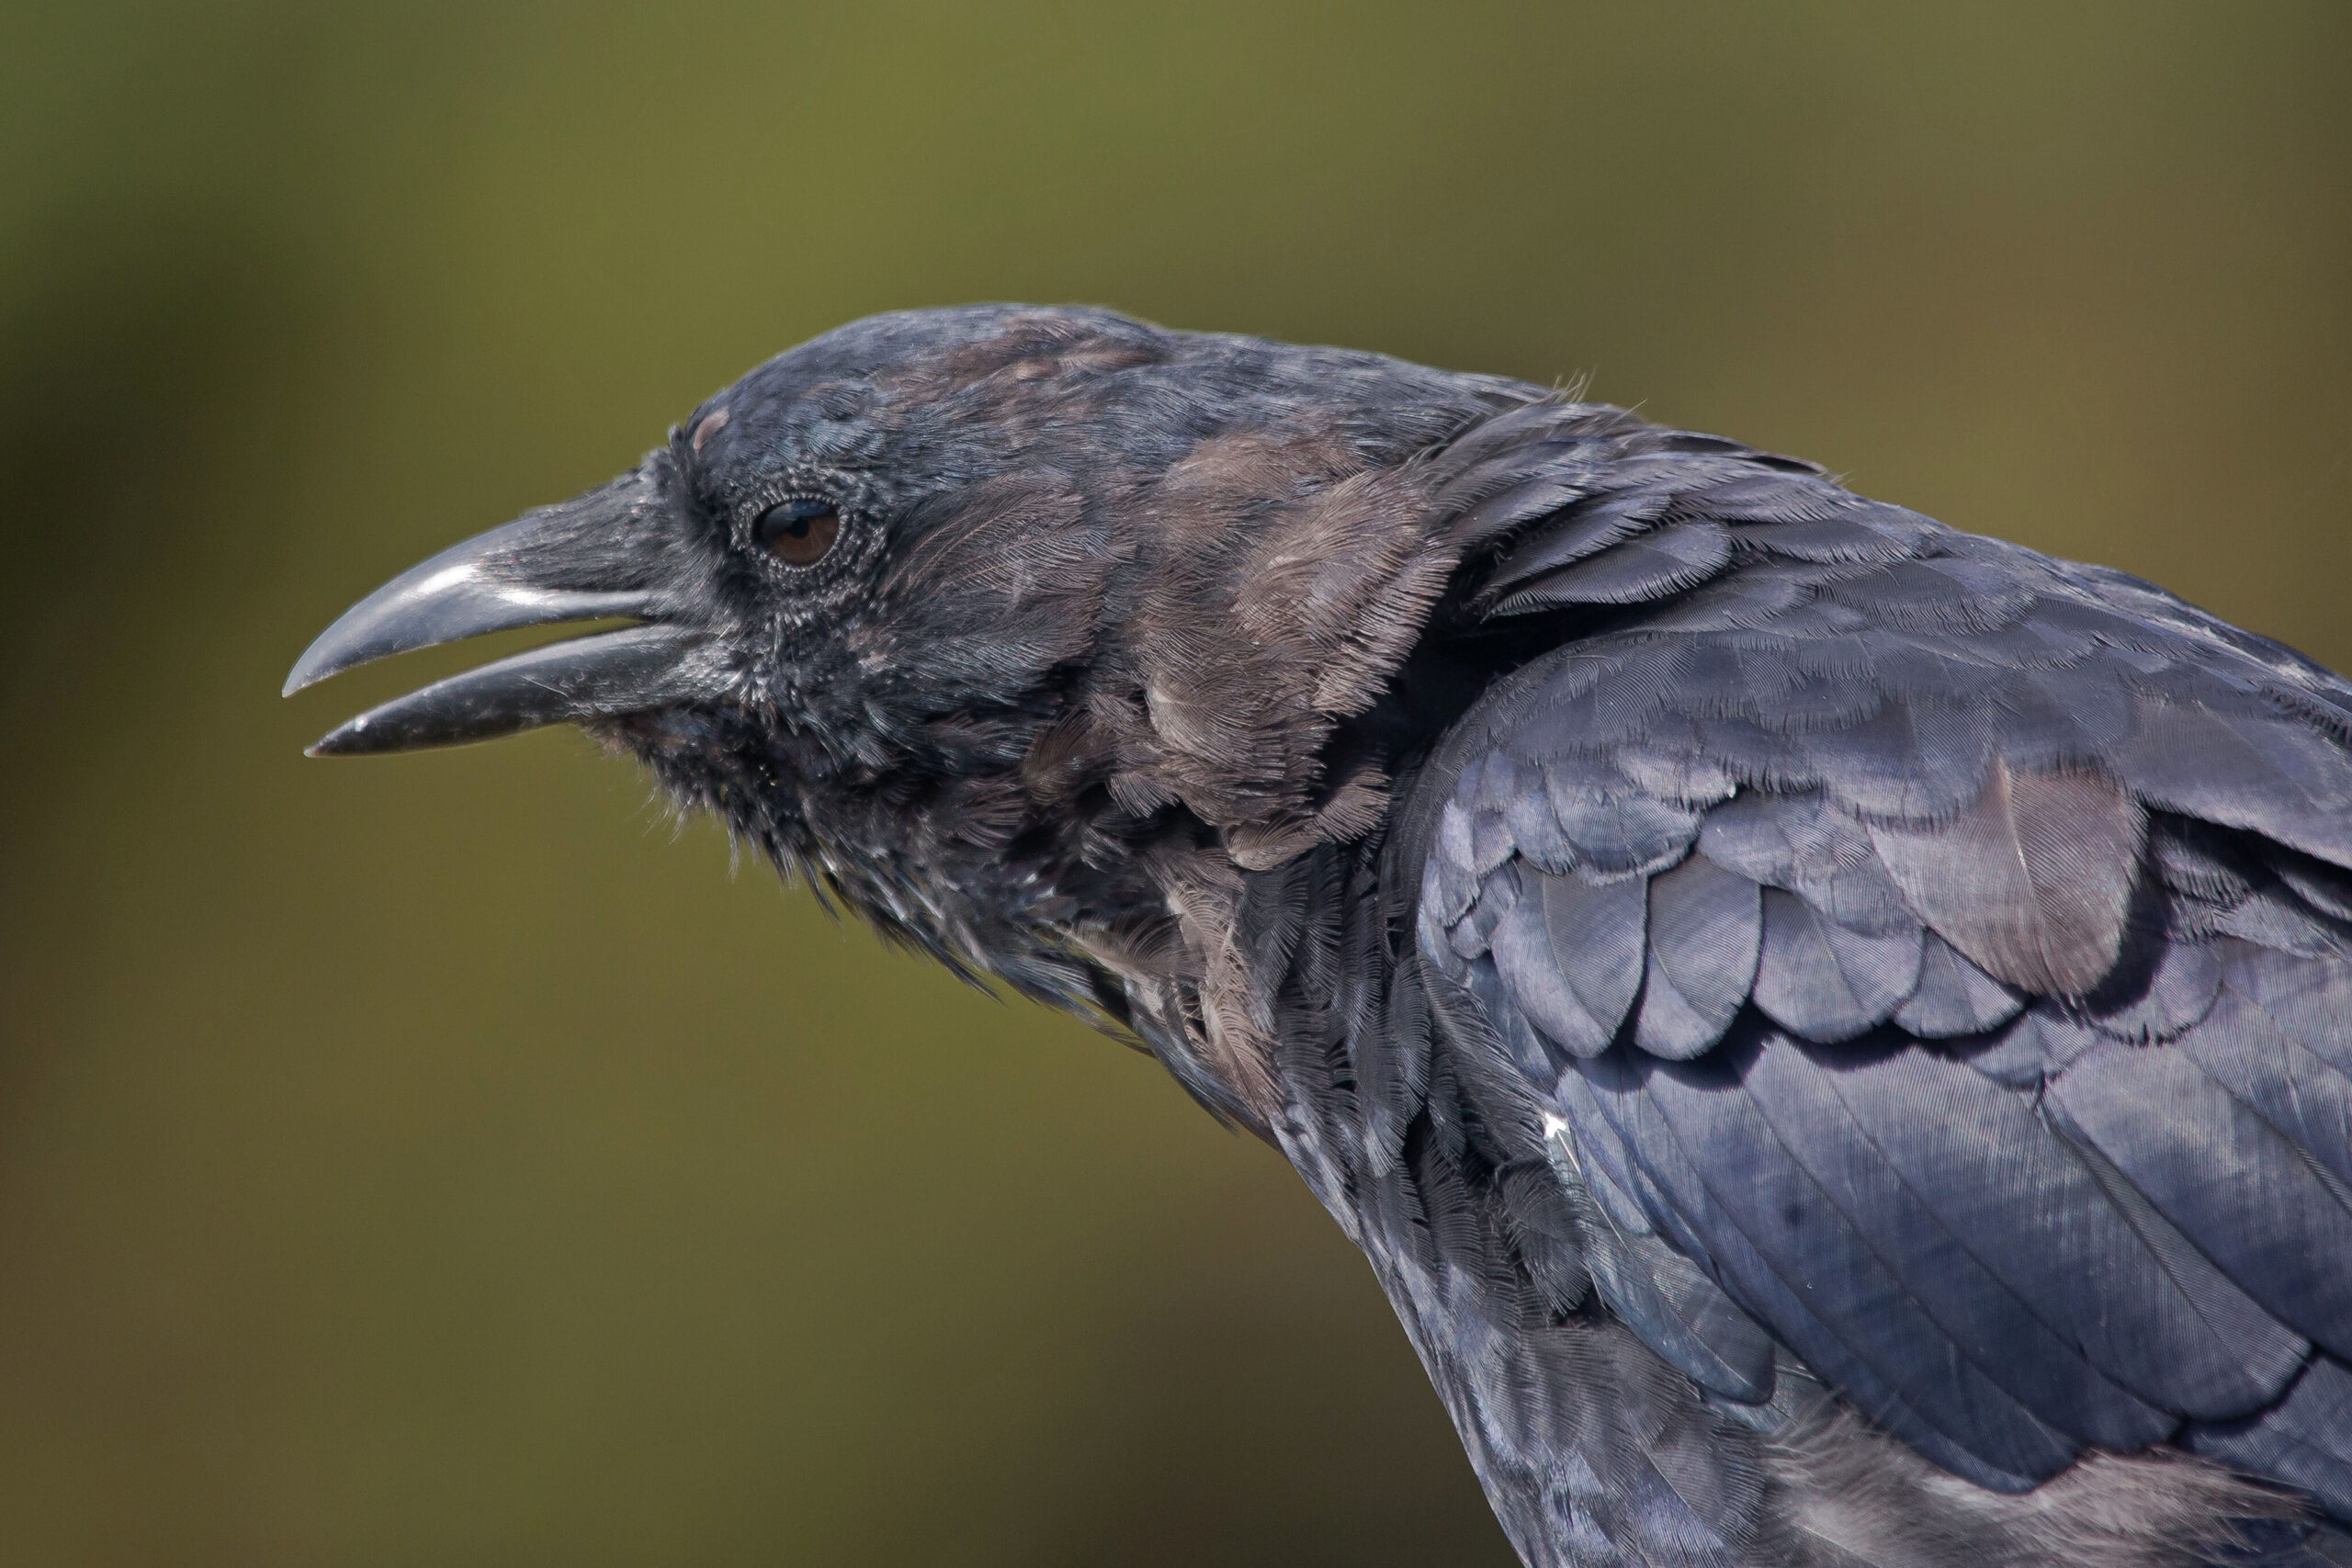 Crows are invading California.